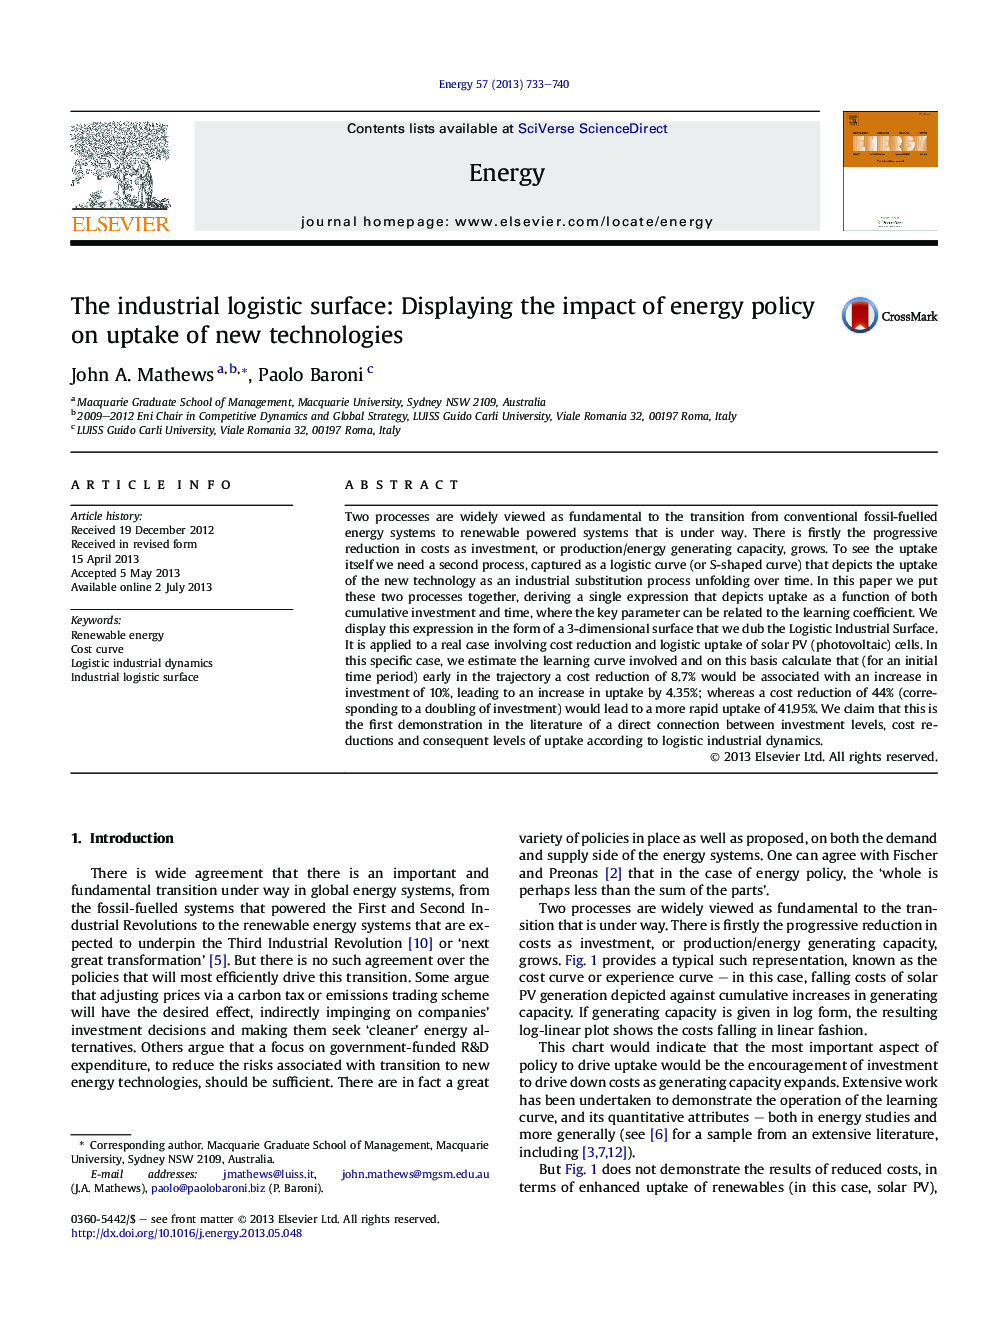 The industrial logistic surface: Displaying the impact of energy policy on uptake of new technologies